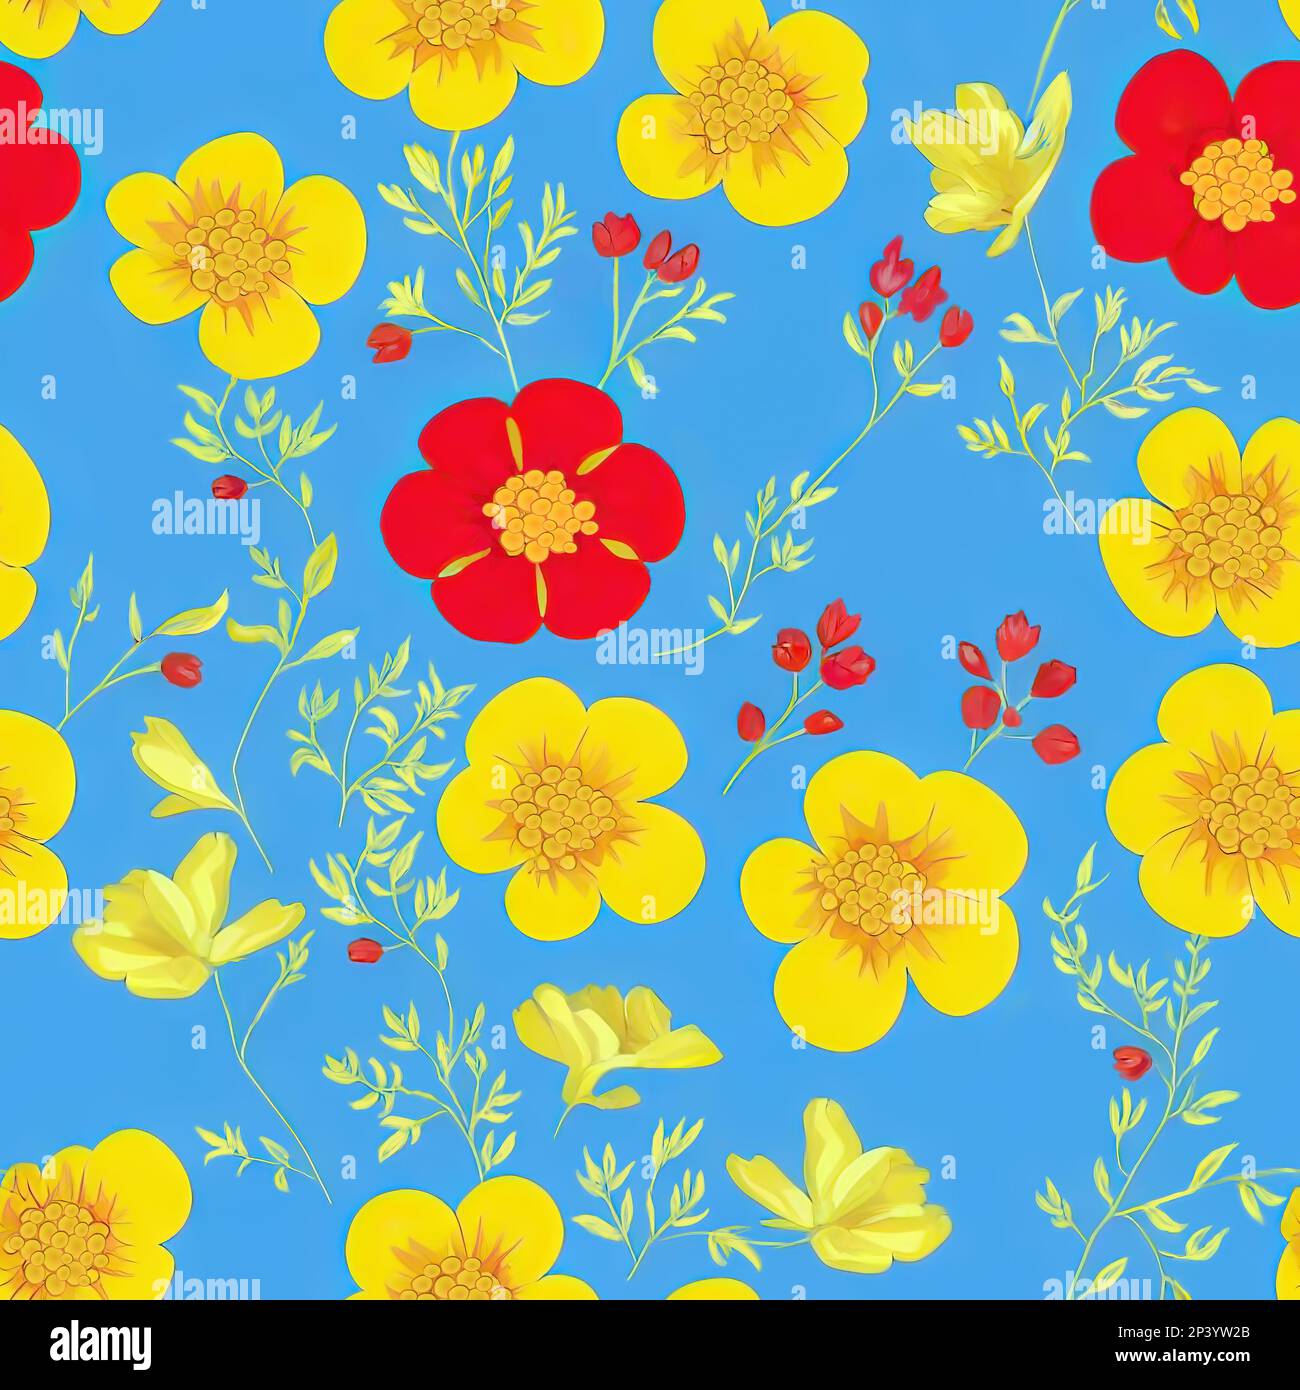 Illustration of seamless red and yellow floral pattern with blue background Stock Photo